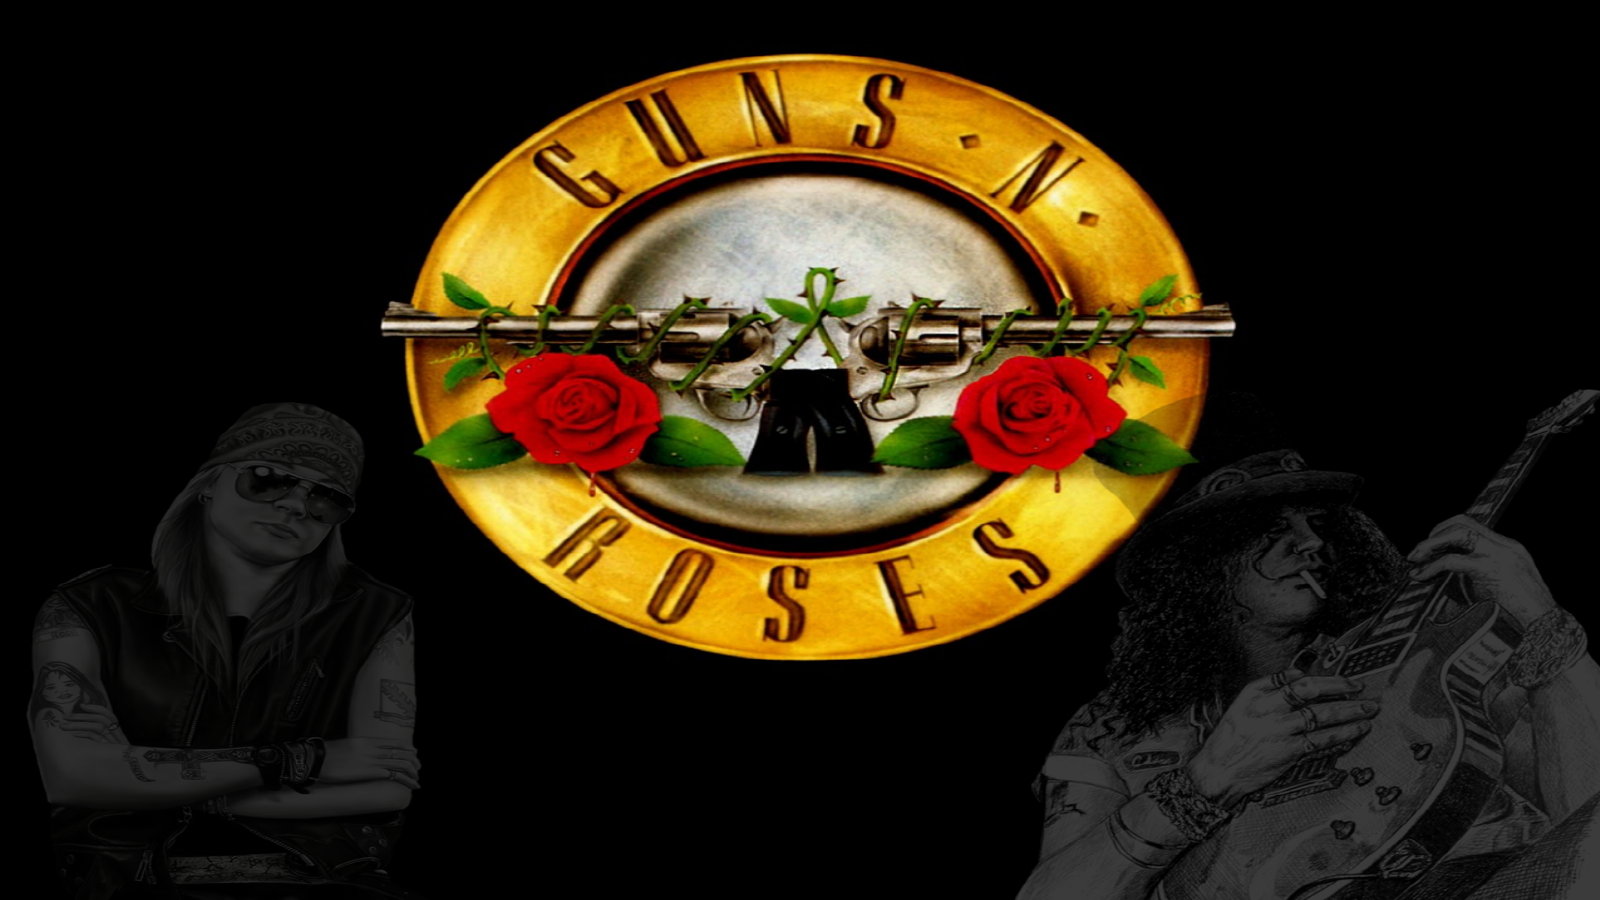 Awesome Guns N' Roses free wallpaper ID:256861 for hd 1600x900 computer